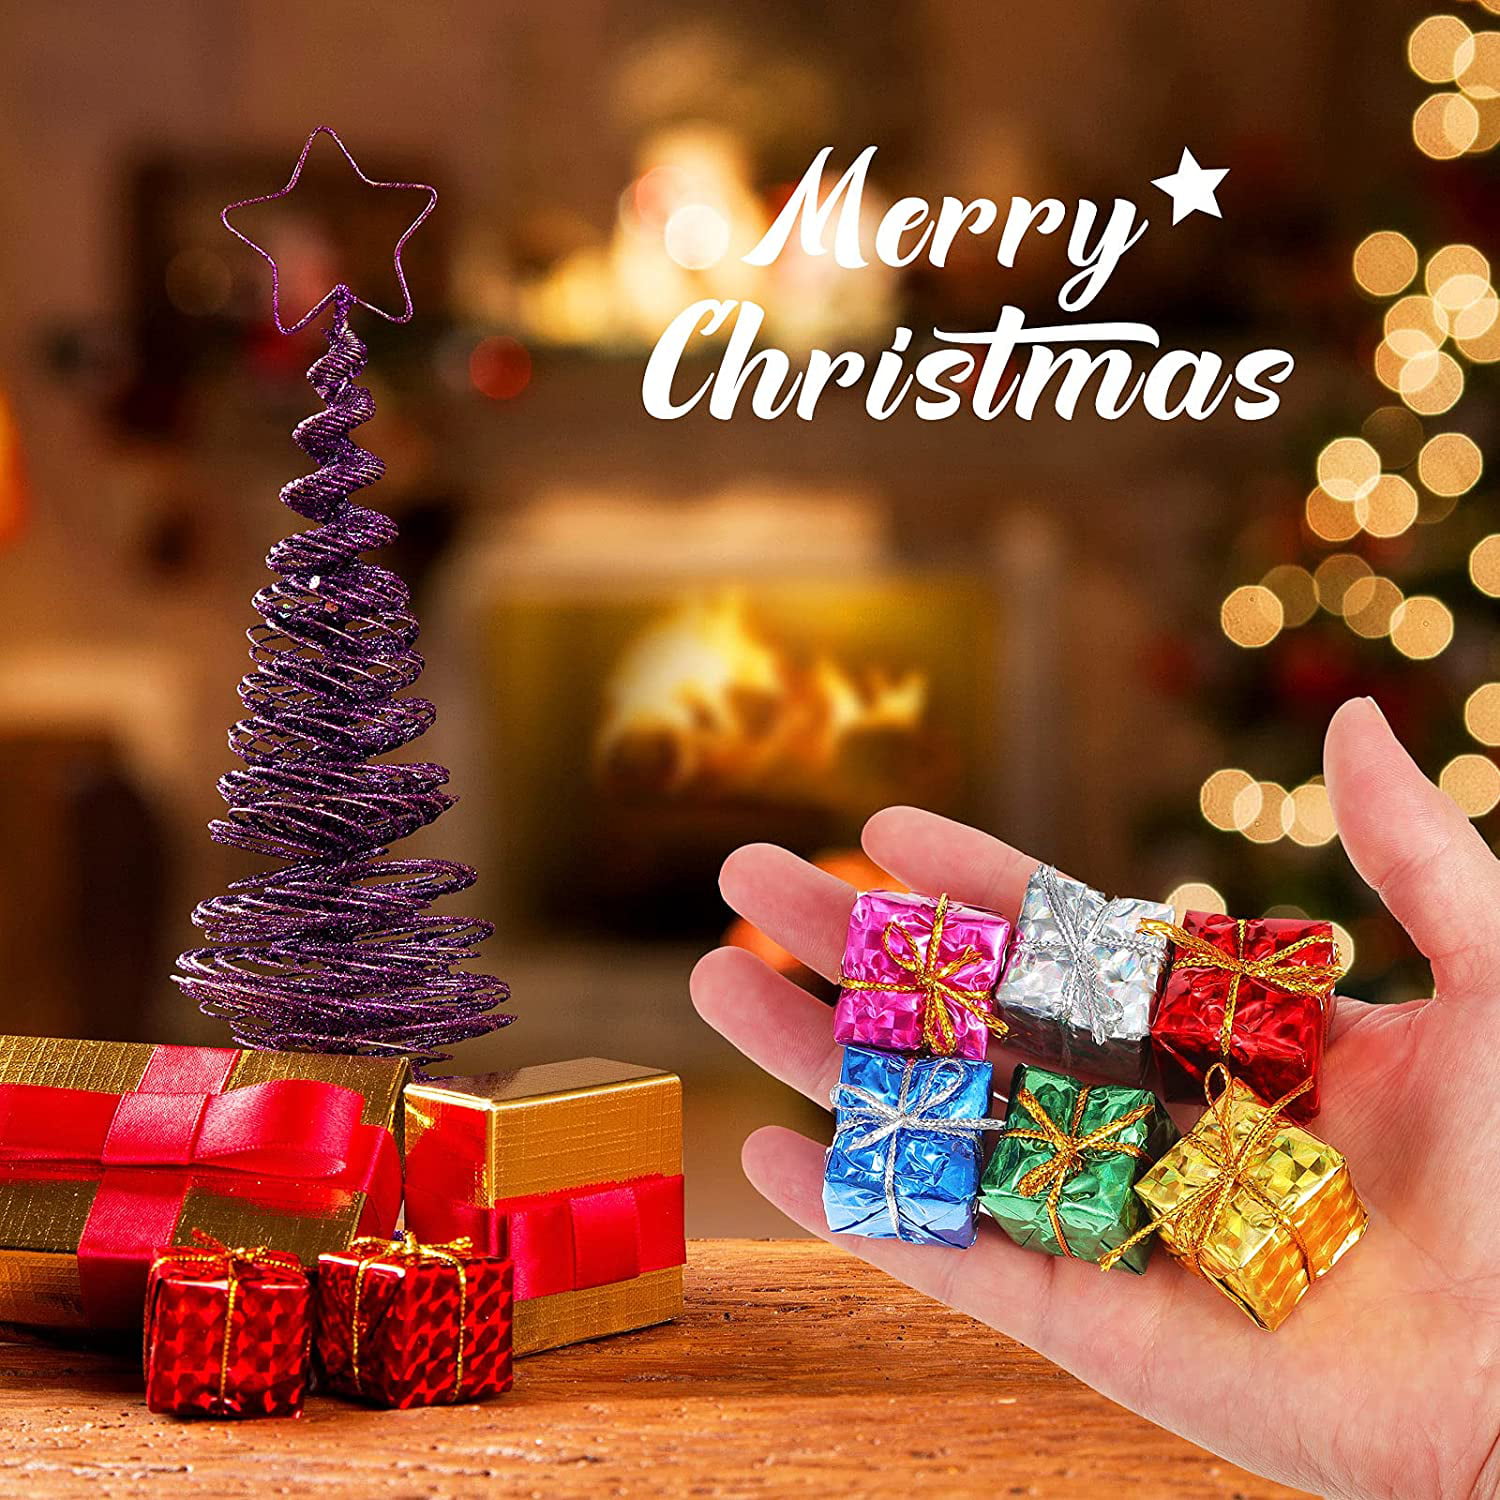 Christmas Sale! 12pcs/lot Shiny Tiny Christmas Ornaments Assorted Color Mini Candy Box Ornaments for Xmas Trees Party Supplies Han, Size: 12 Pcs